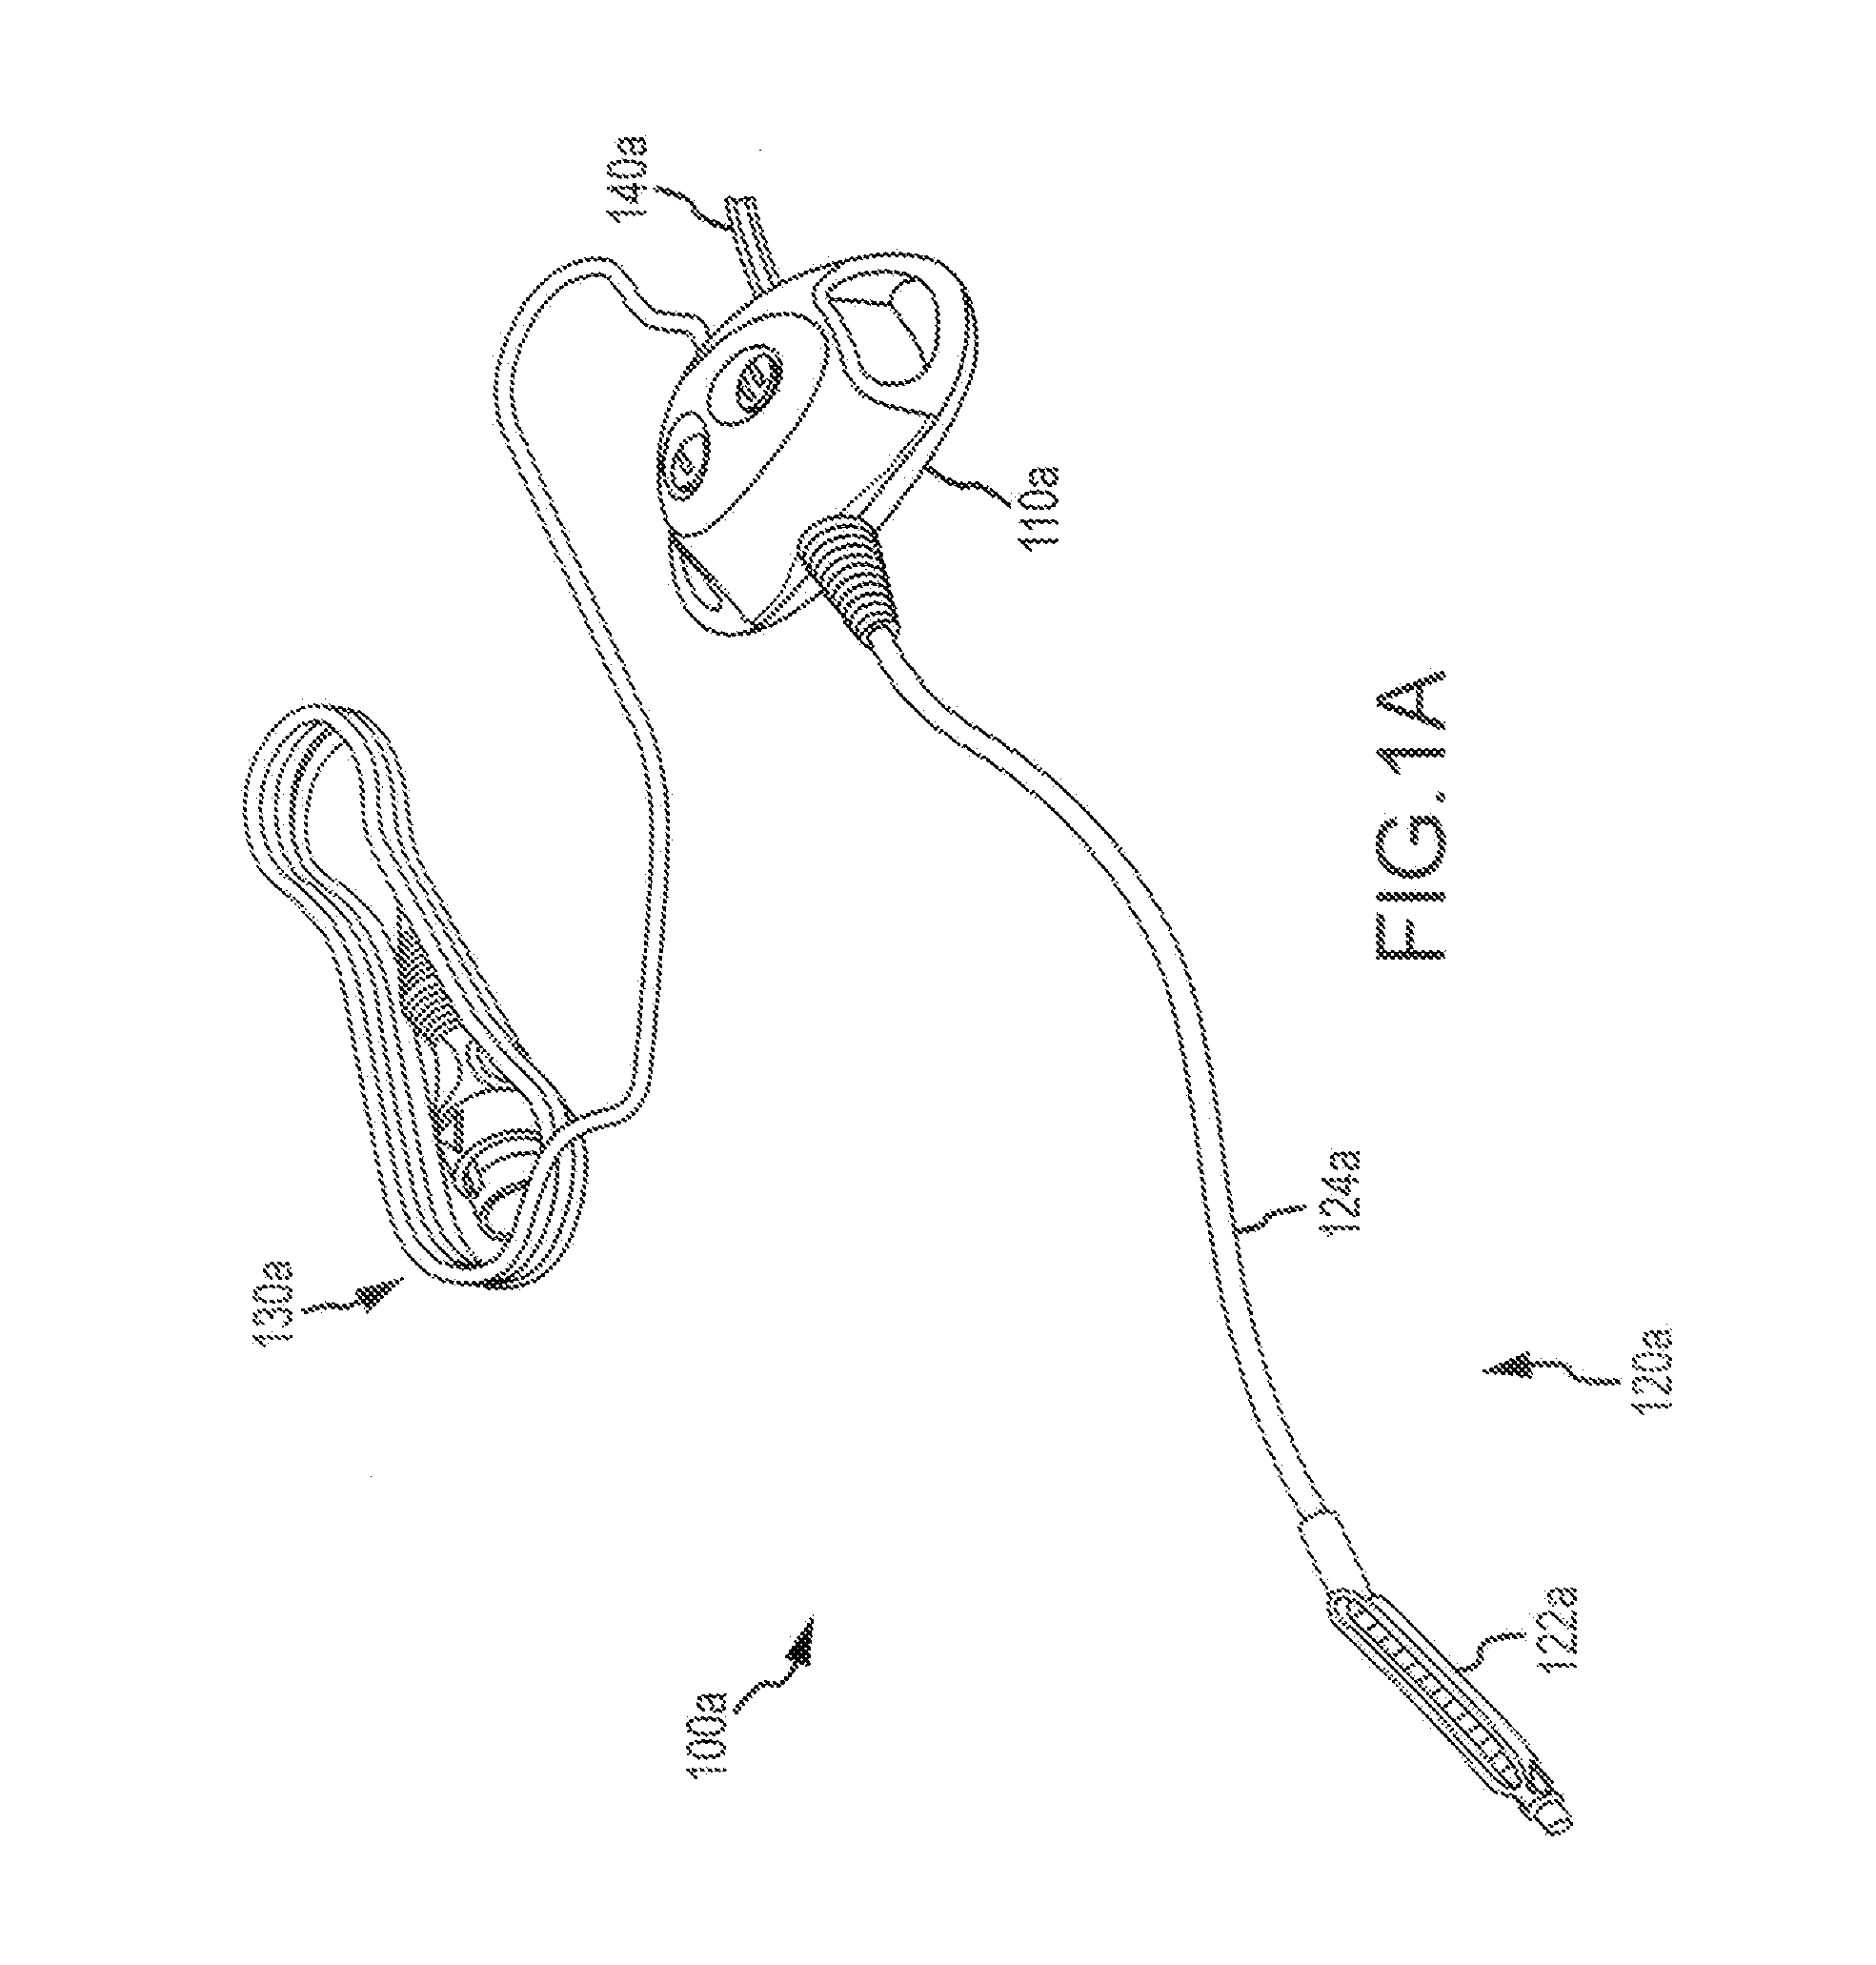 Stabilized ablation systems and methods